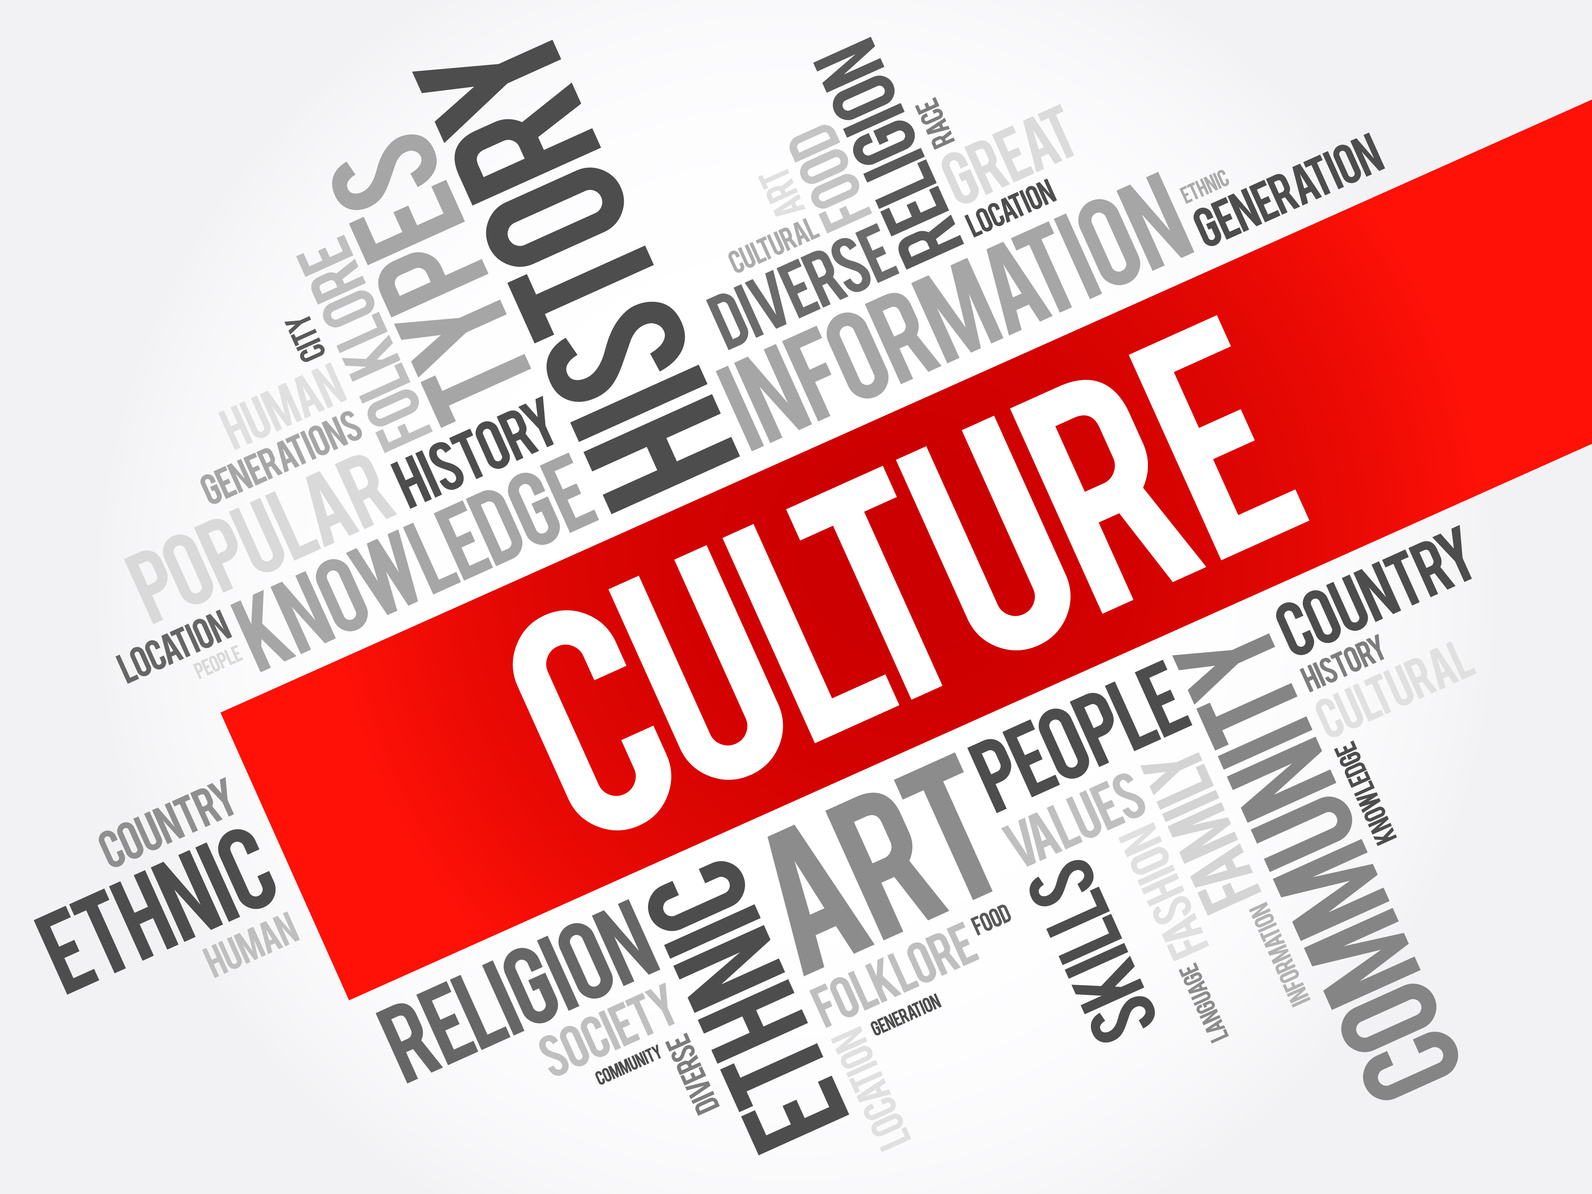 Describing 'Culture' With 5 Images